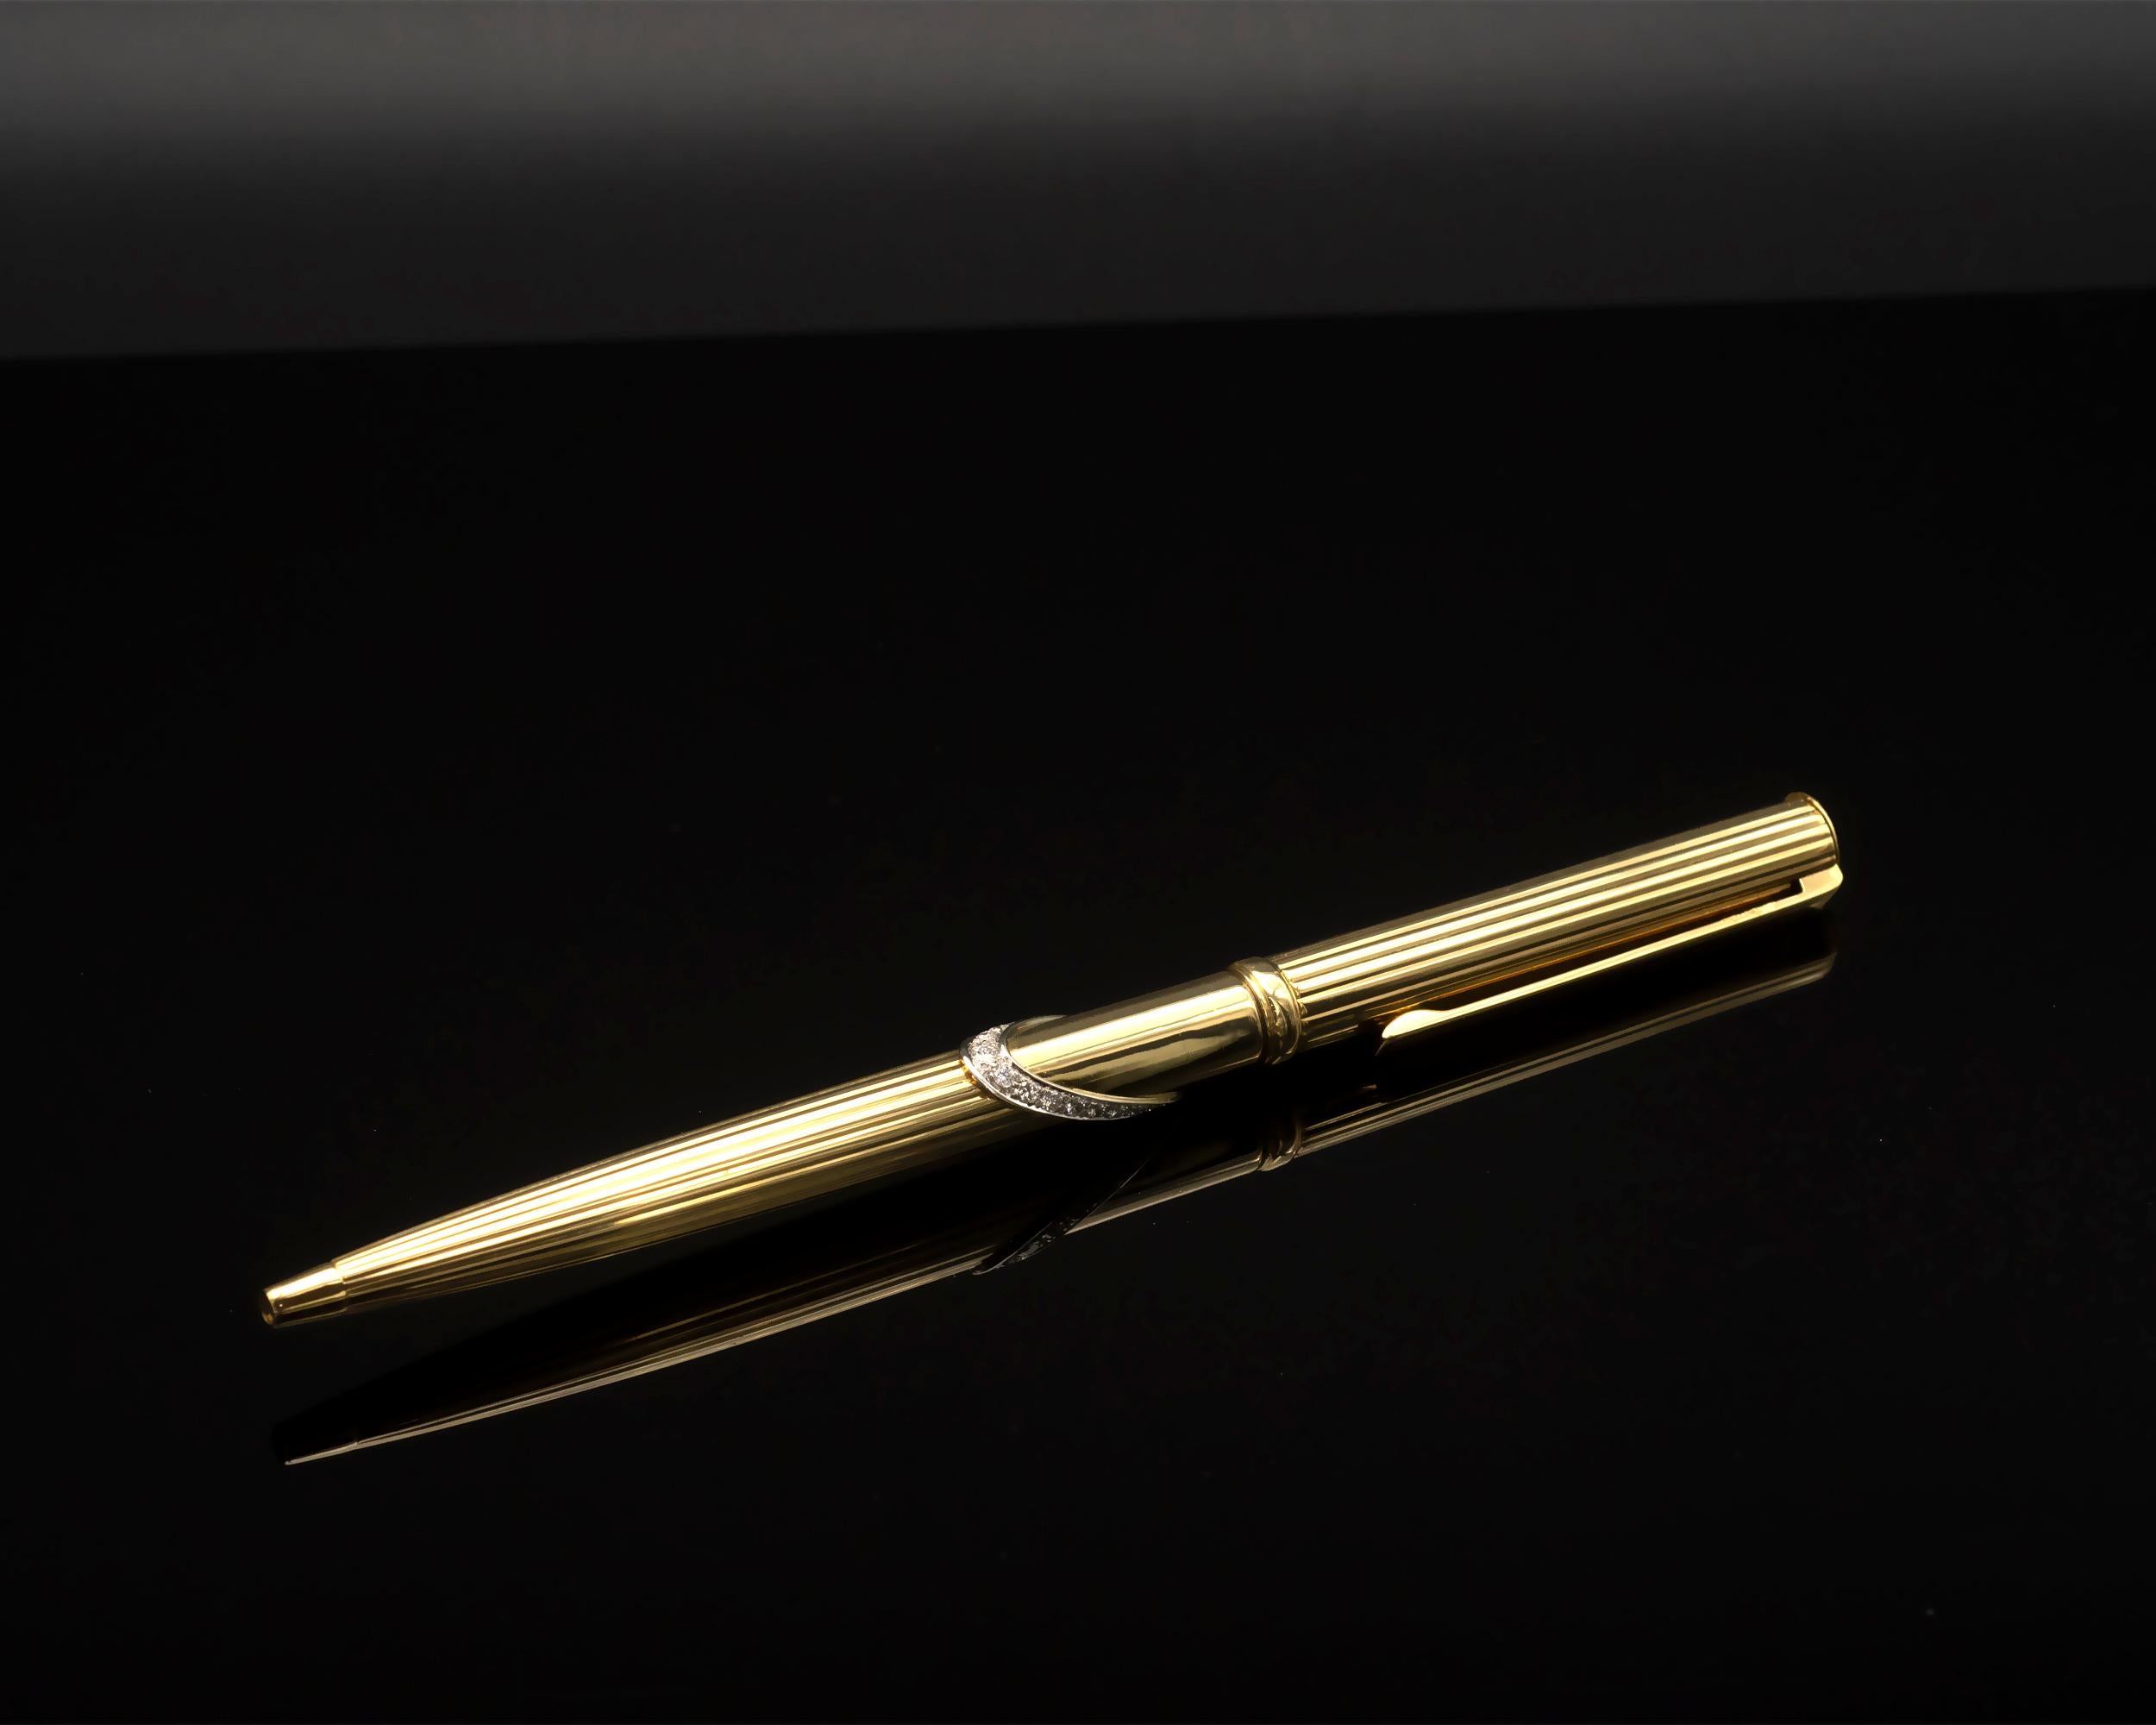 Extraordinary Dunhill rollerball pen in 18 karat yellow Gold with in its midst a line of diamonds set on White gold . Incredibly refined design and superb craftsmanship quality for a rare item. mint condition, original box.
Total weight 29.75